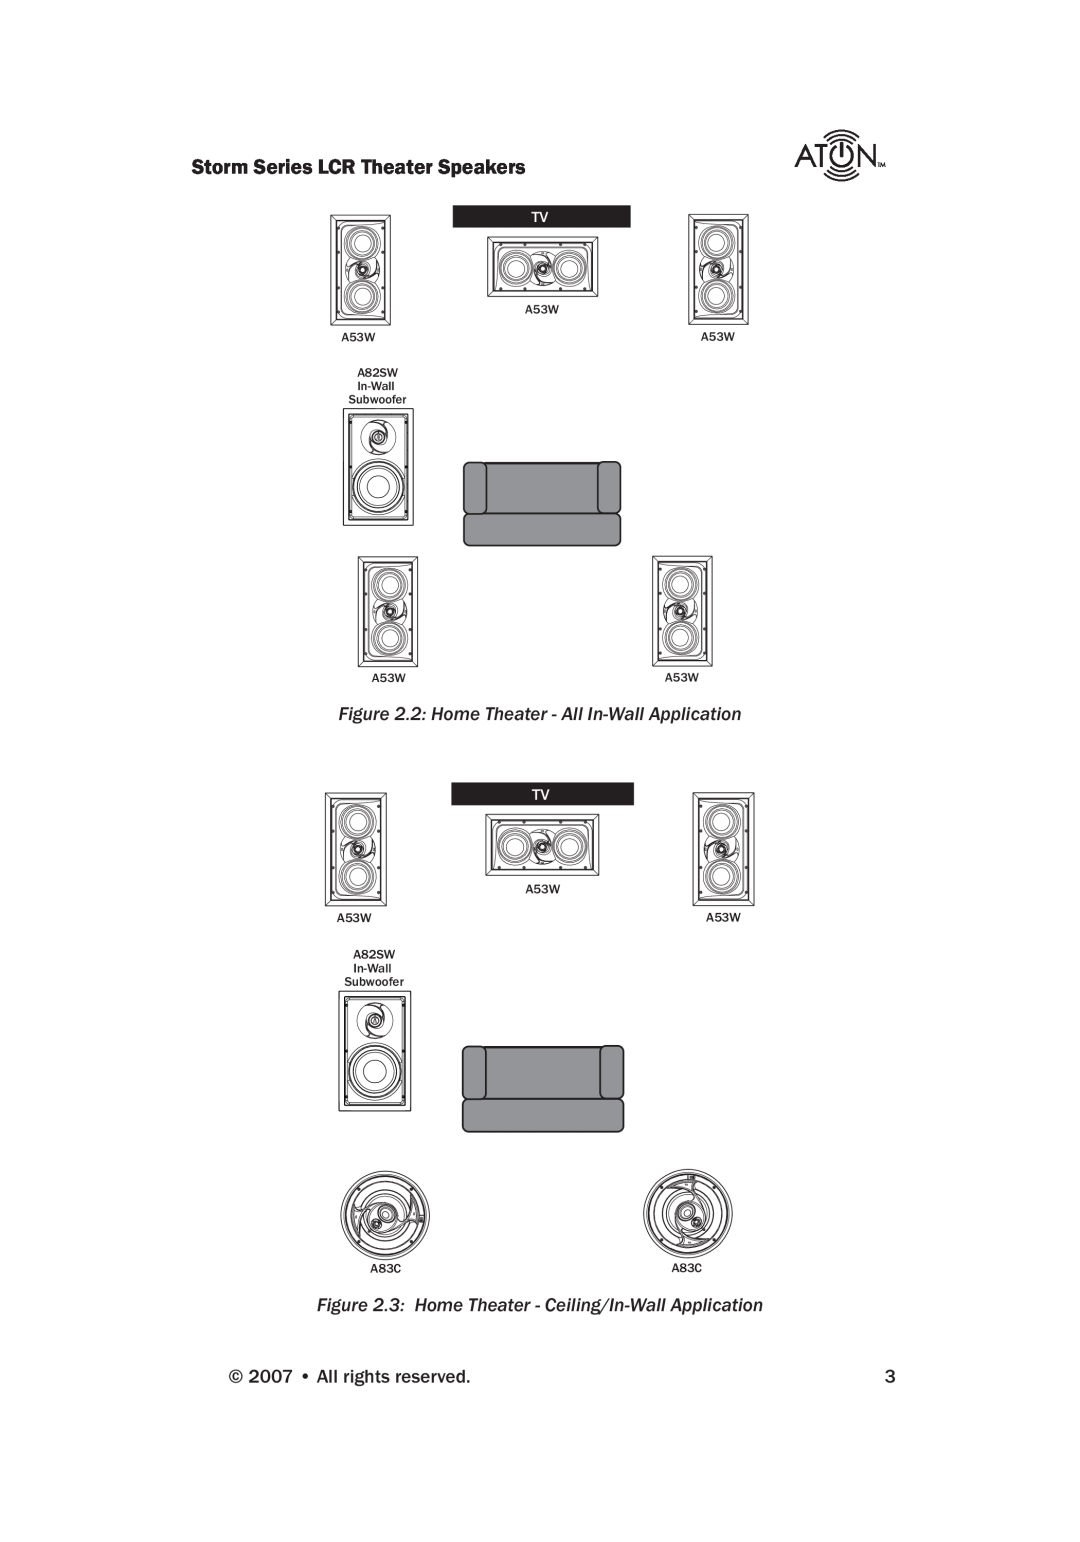 ATON A83C manual 2 Home Theater - All In-WallApplication, Storm Series LCR Theater Speakers, All rights reserved, A53W 